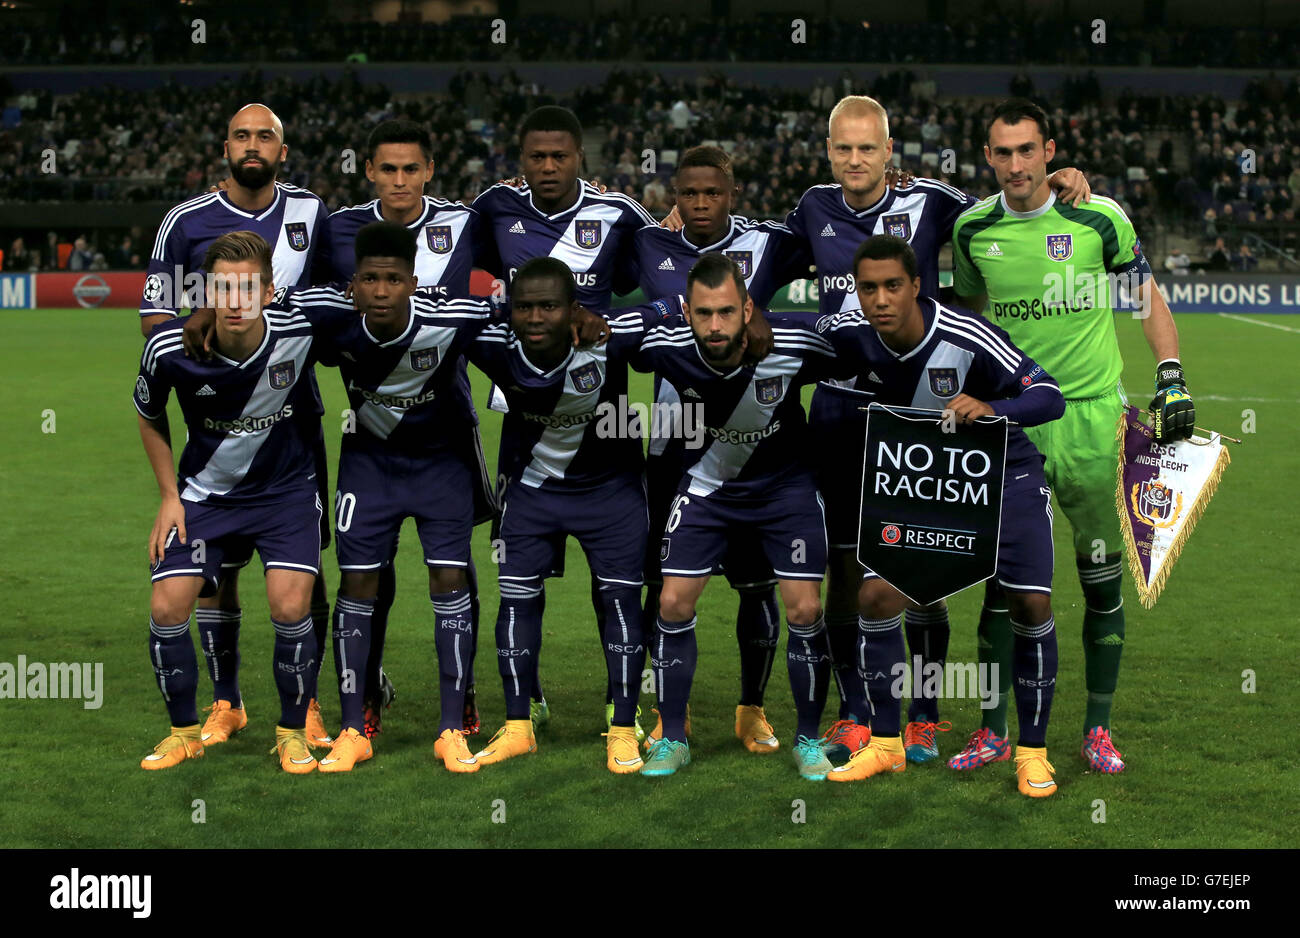 Helping you get to your RSC Anderlecht game with Uber